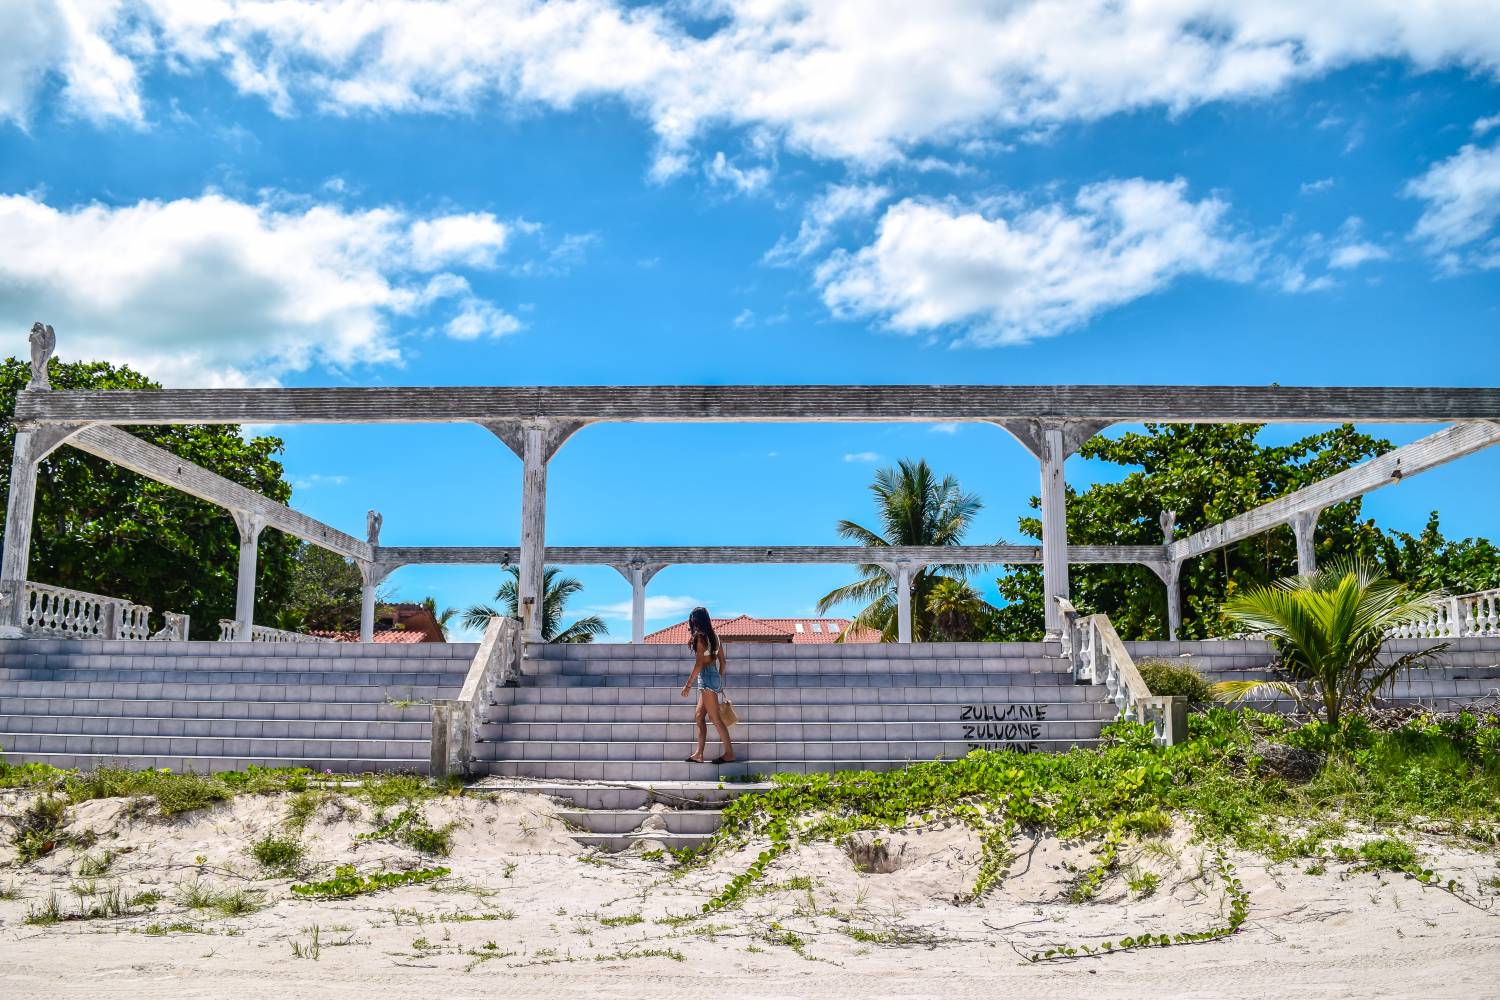 The Most Fascinating, Abandoned Property On Ambergris Caye, Belize - Essene Way